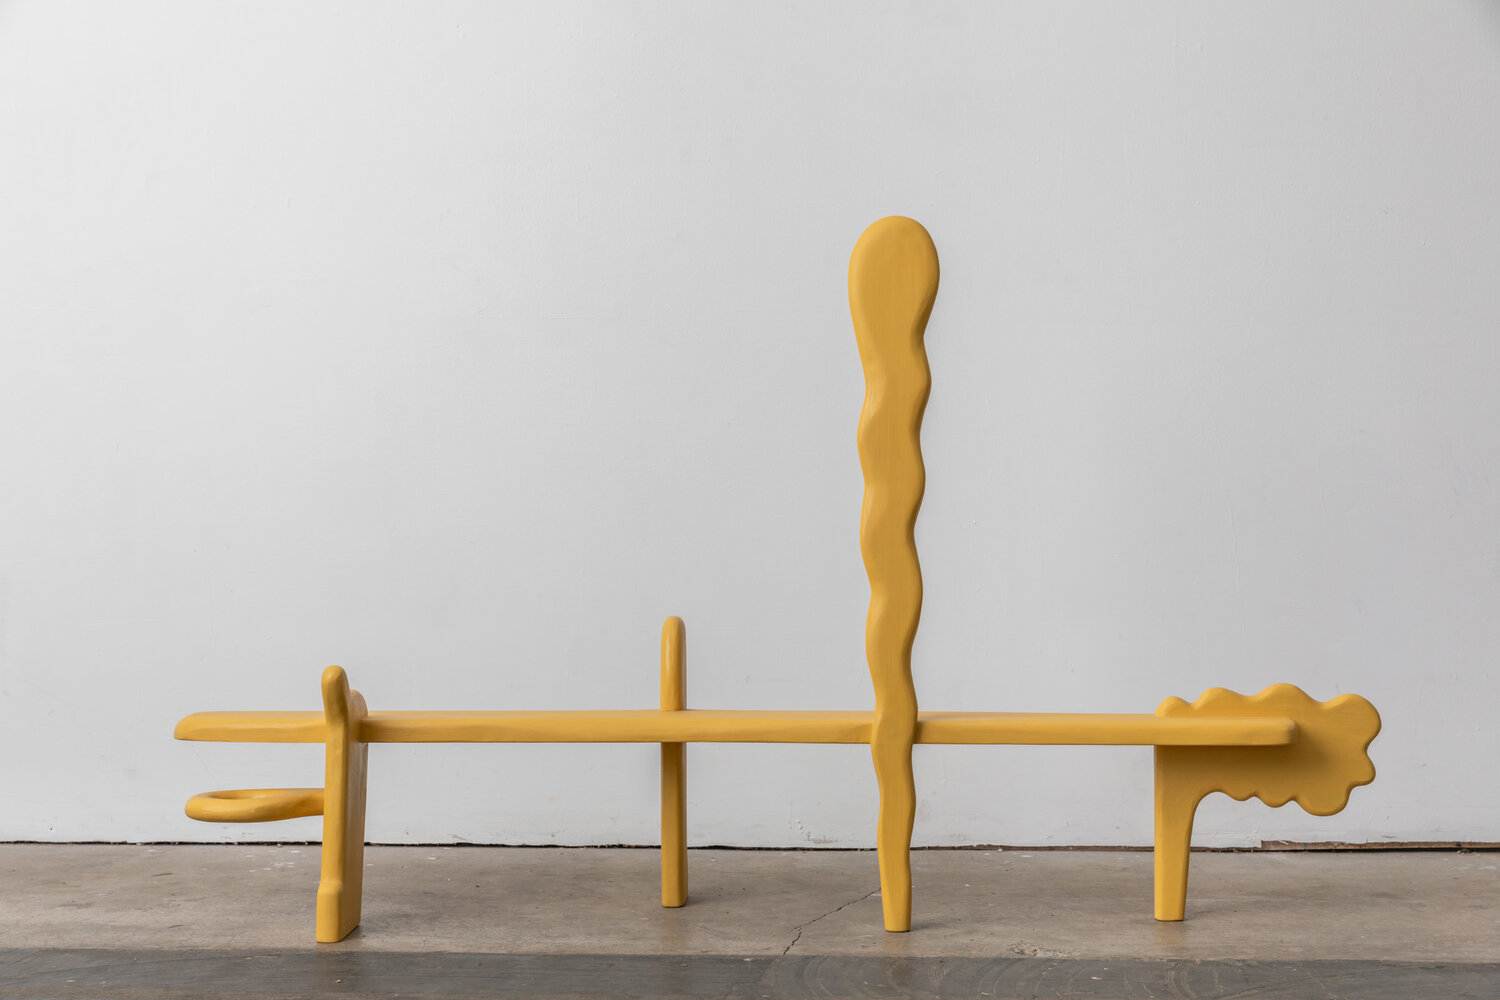 Yellow bench with comic strip-inspired shapes